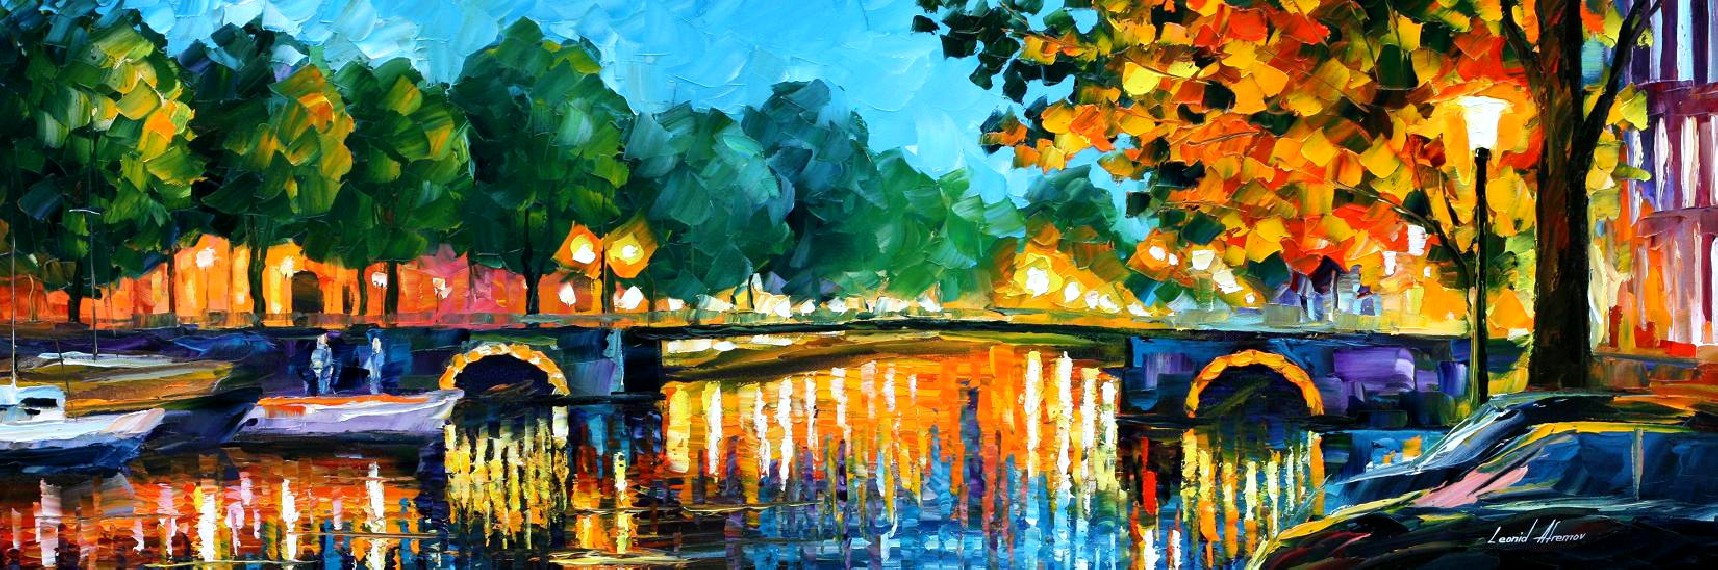 Modern impressionism palette knife oil painting City073